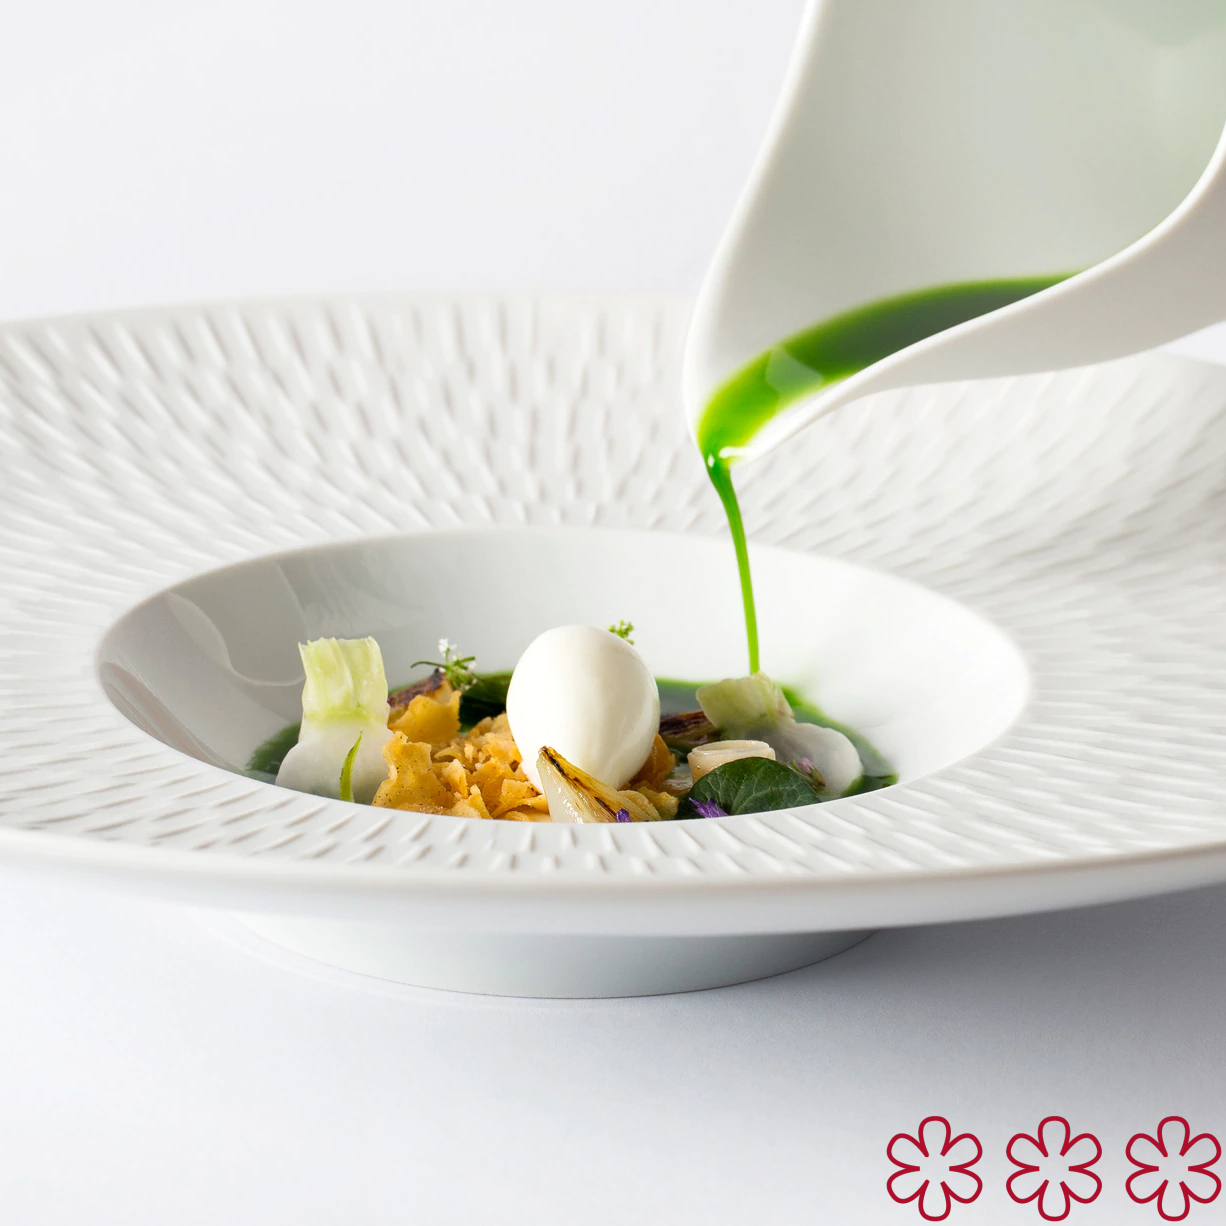 Experience sensational cuisinery at The Fat Duck